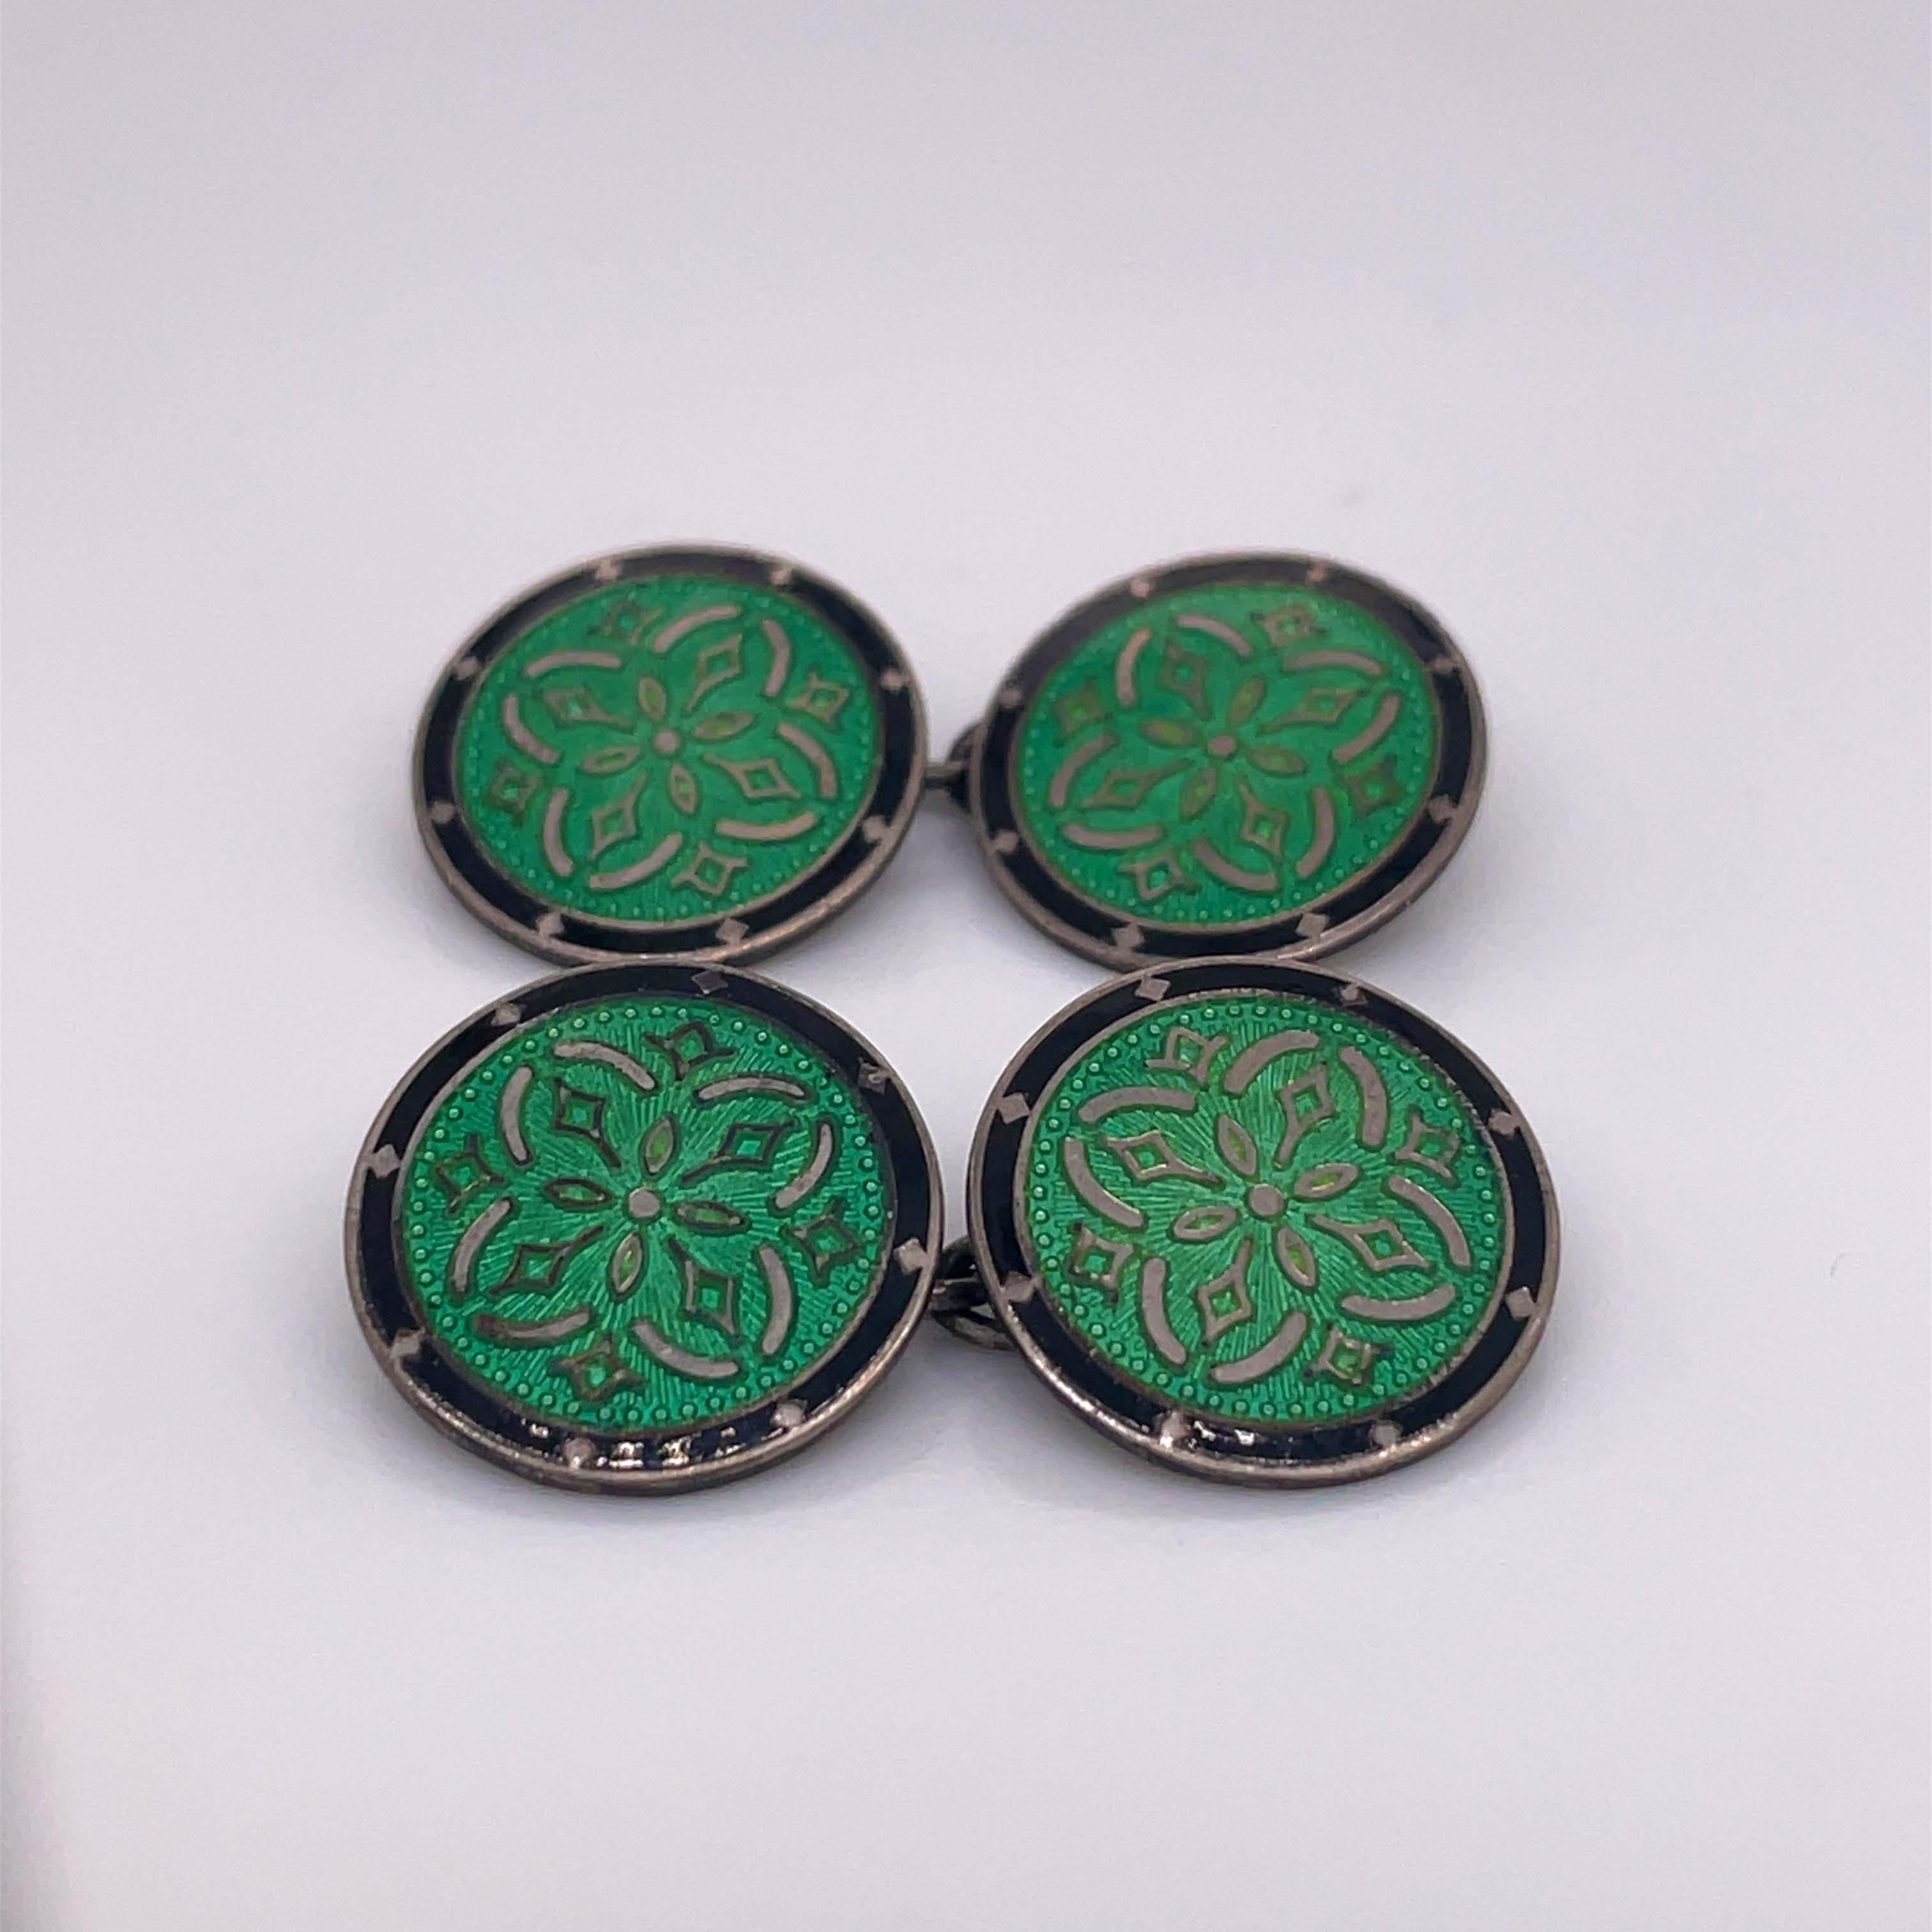 This is a spectacular pair of 1920s Art Deco enameled cufflinks perfect for any man who likes to accessorize! These cufflinks are in sterling silver and enamel, featuring a daring glowing green and a dark black enamel frame. These links are